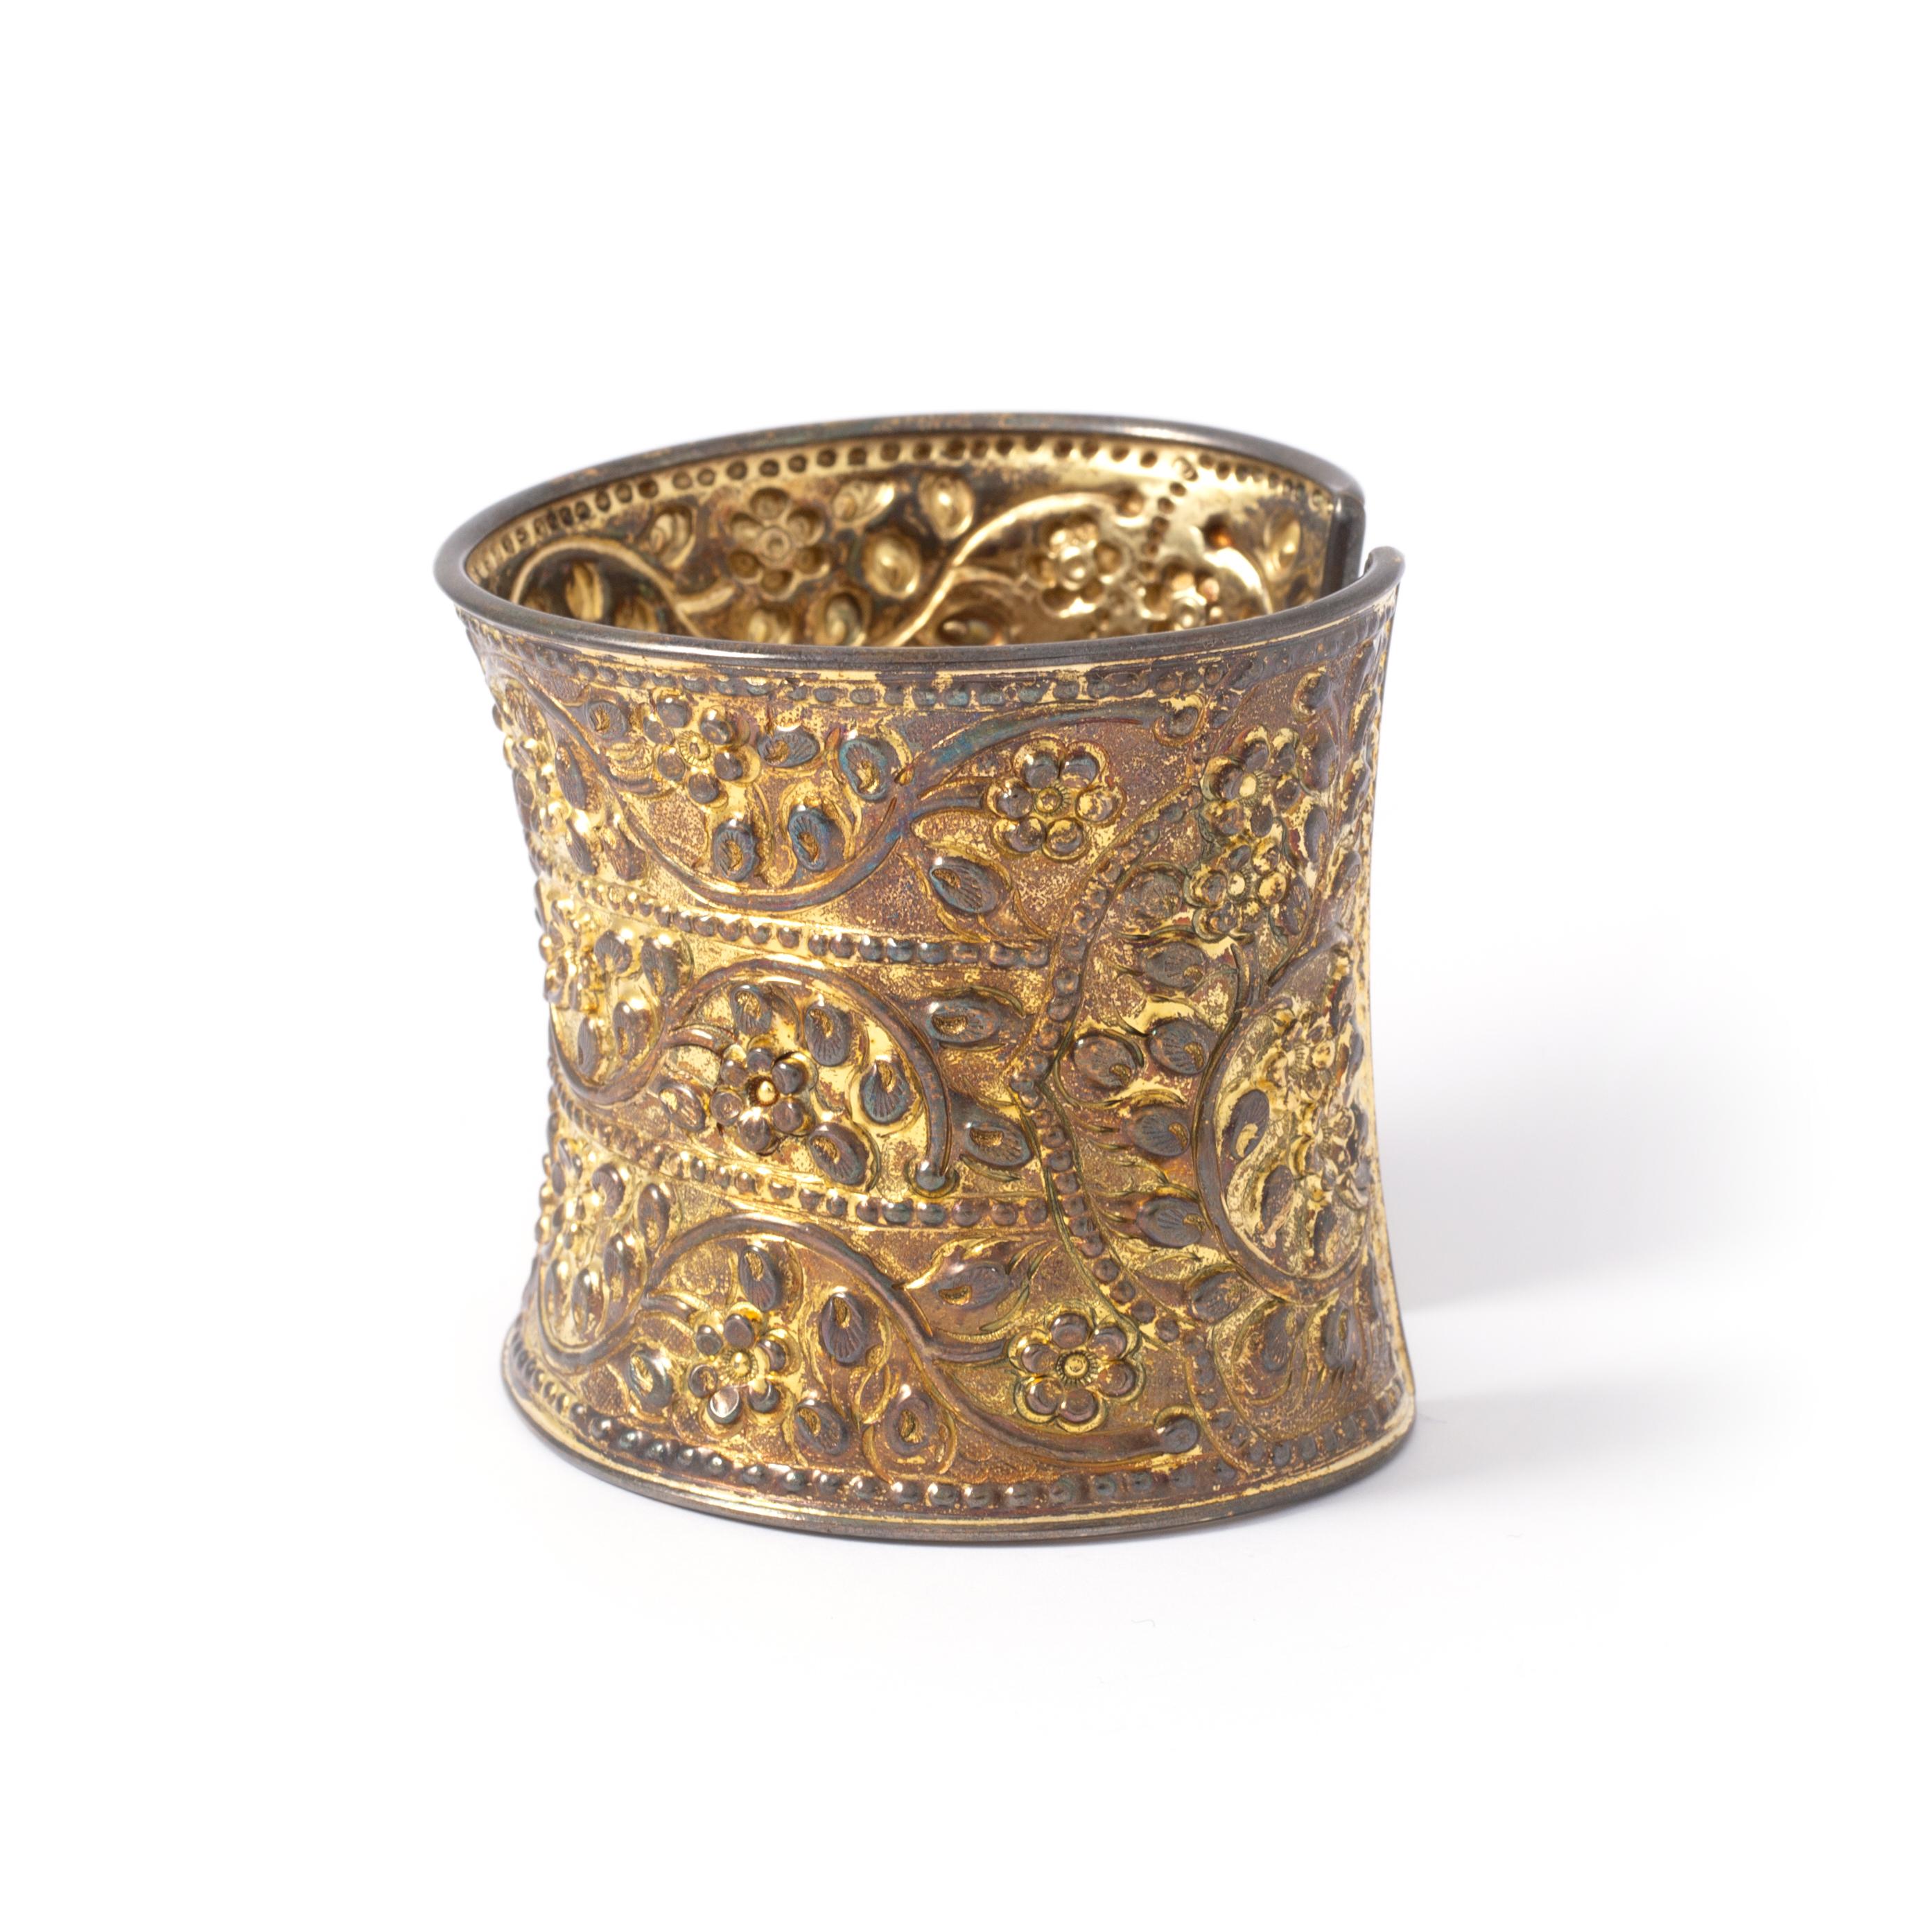 Women's or Men's Etruscan Revival Cuff For Sale